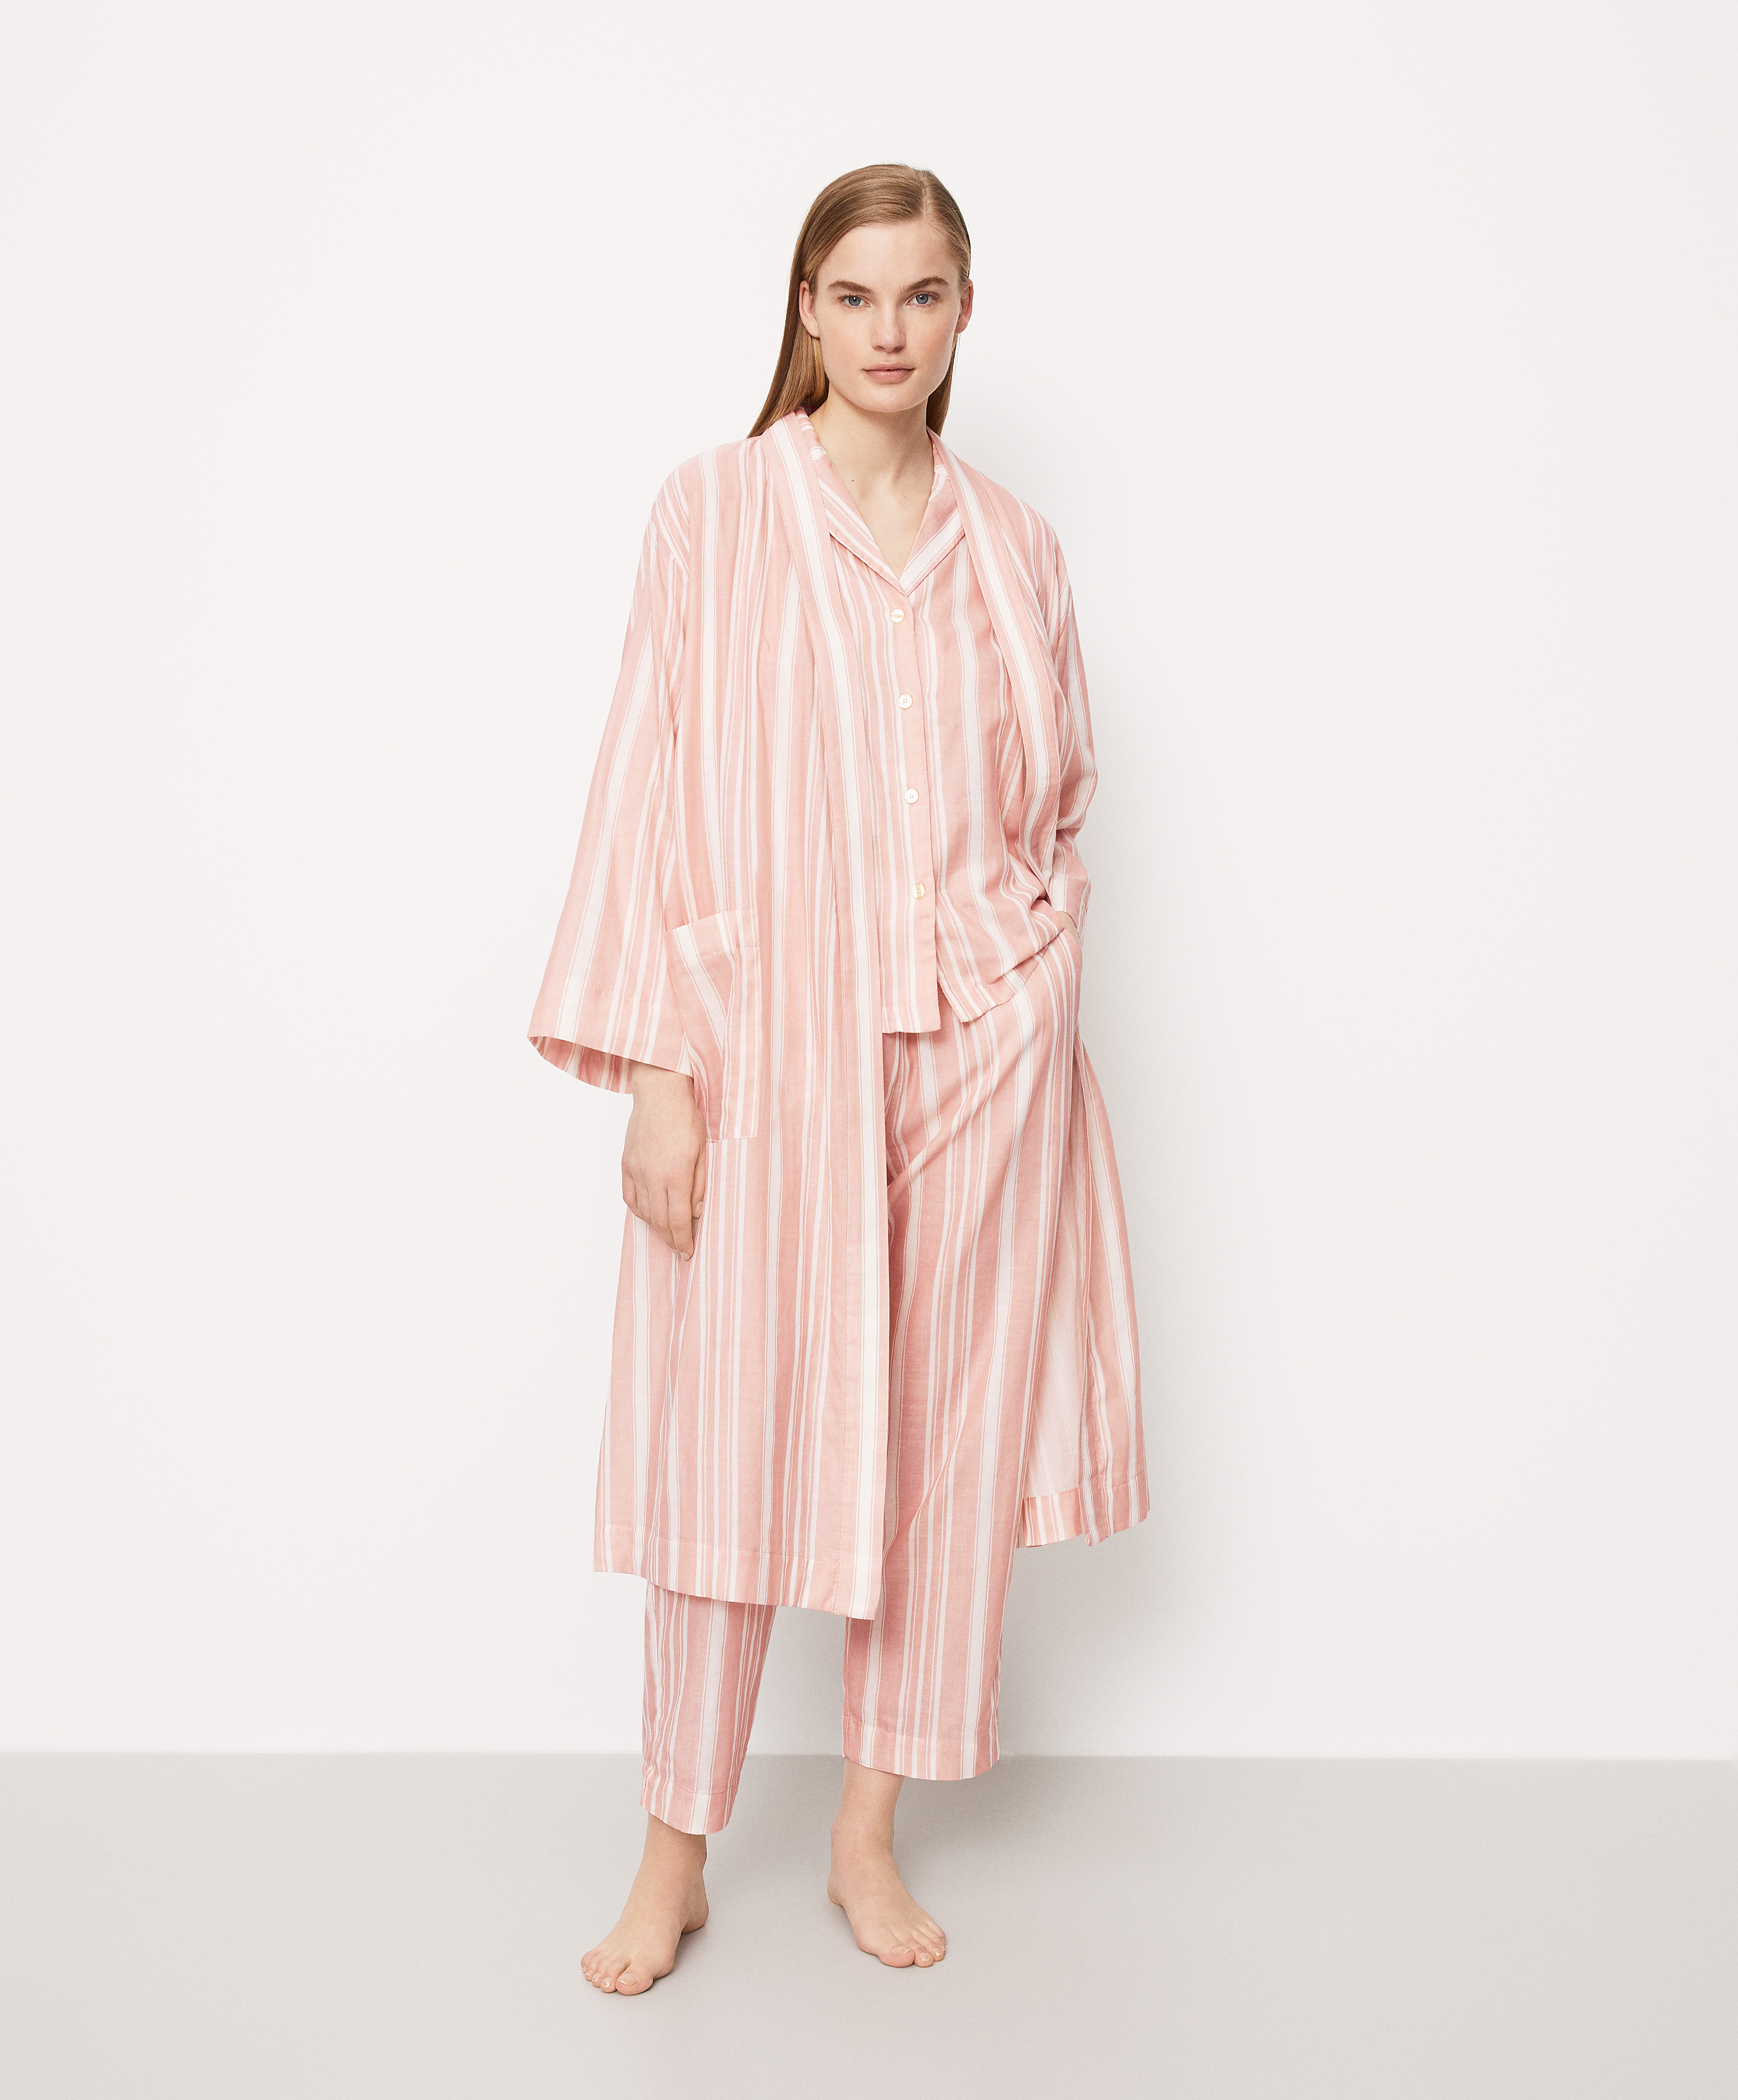 Striped double-face 100% cotton dressing gown